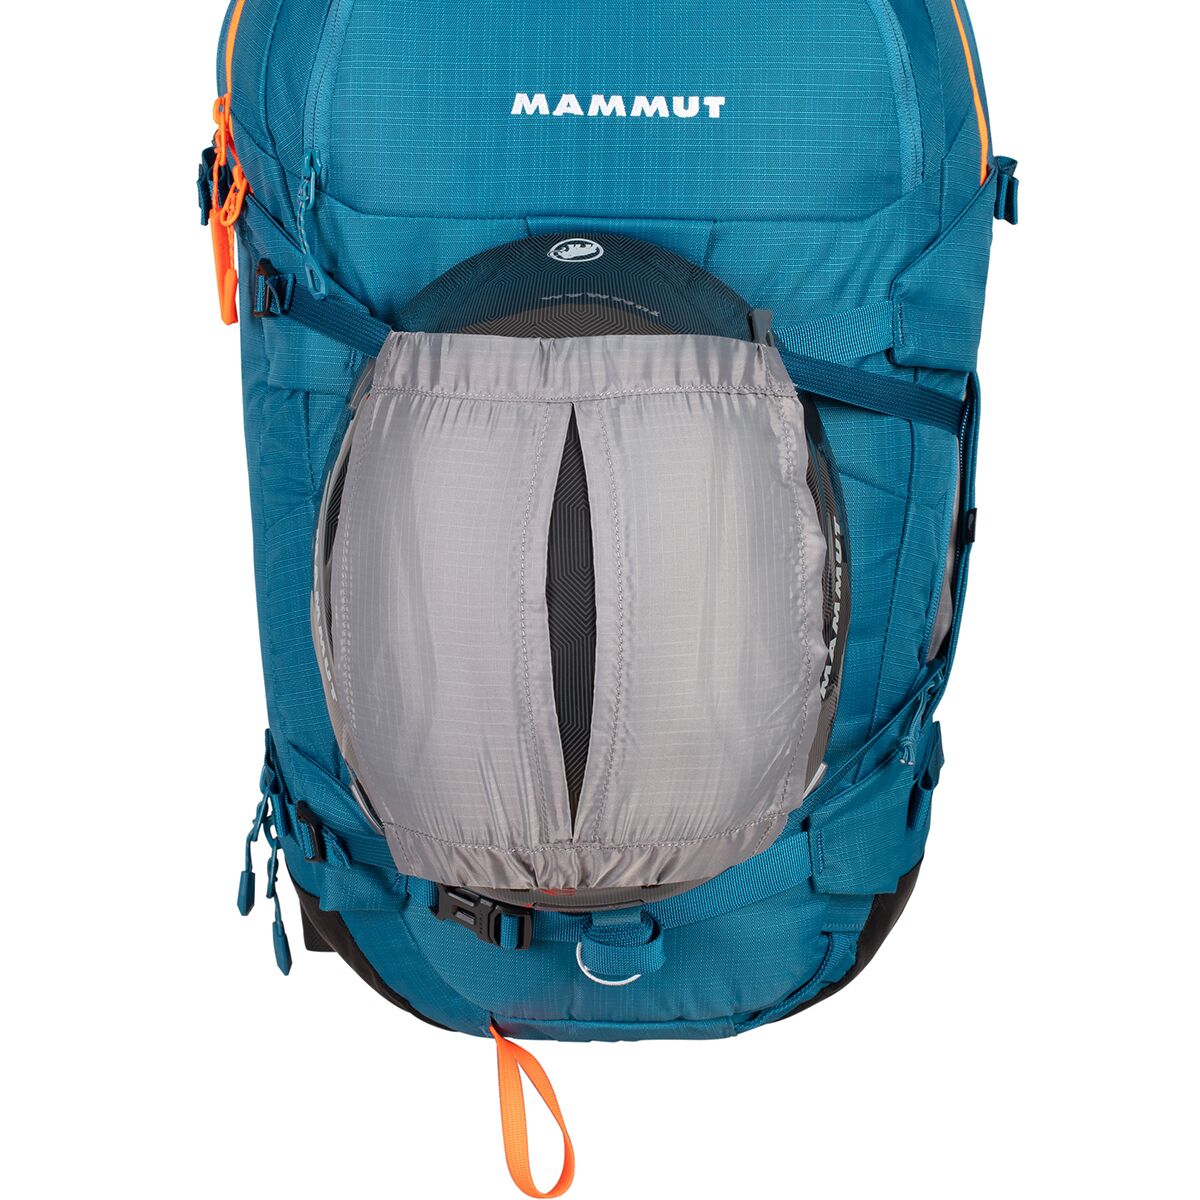 Mammut Ride 30L Removable Airbag 3.0 Backpack - Ski